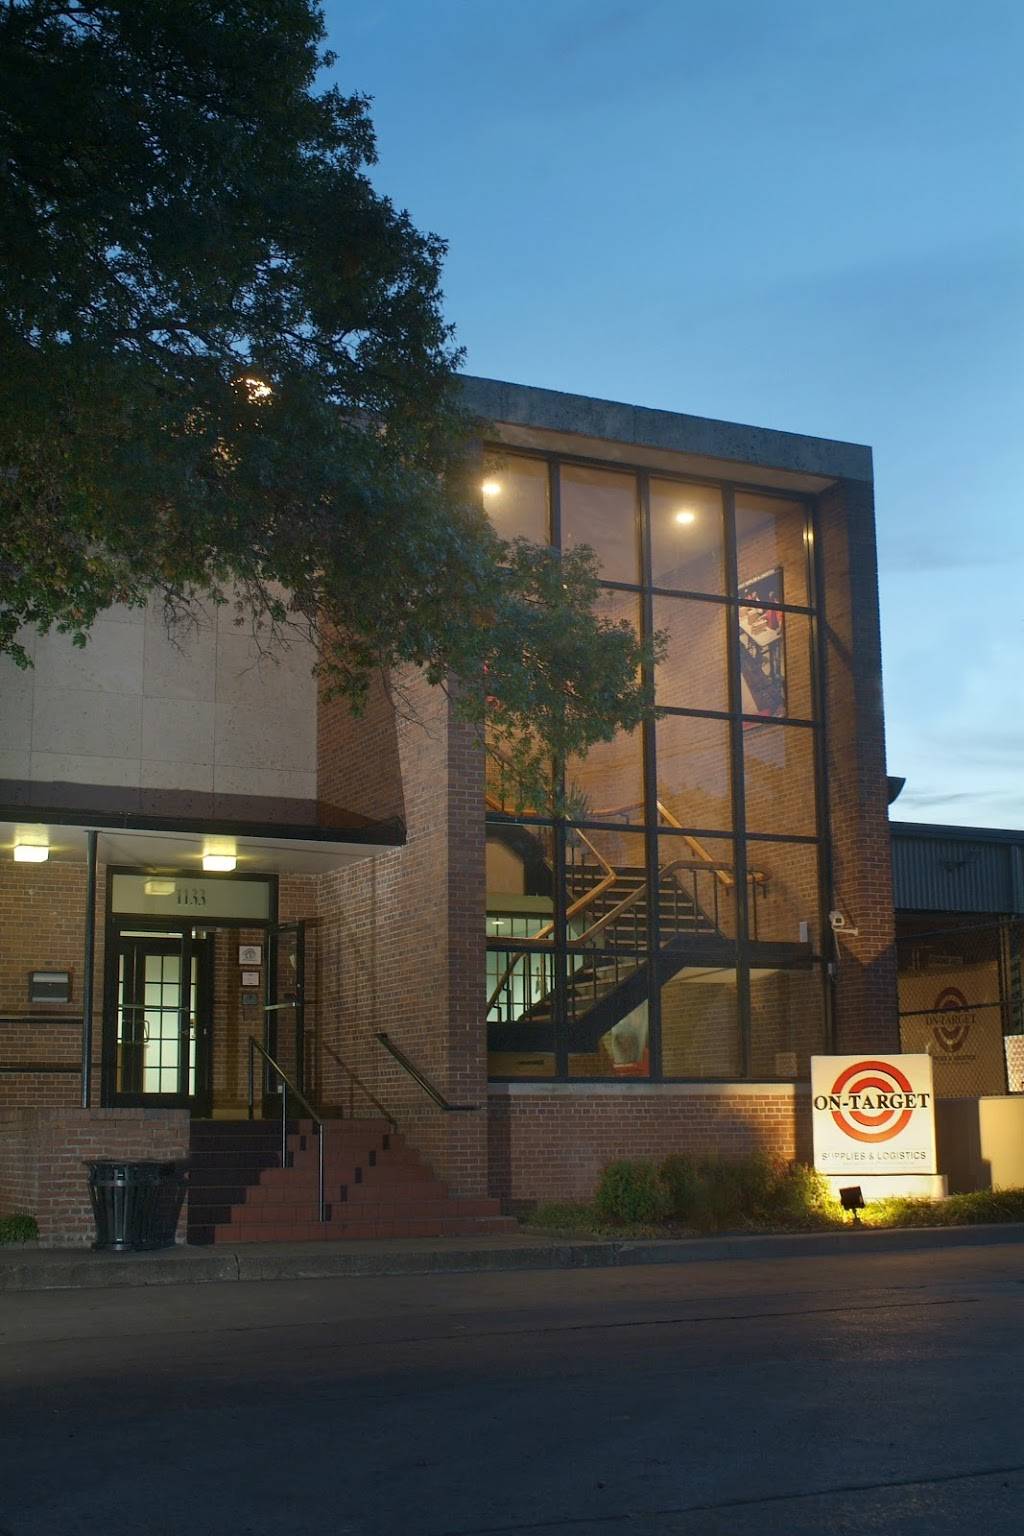 On-Target Supplies & Logistics | 1133 S Madison Ave, Dallas, TX 75208 | Phone: (214) 941-4885